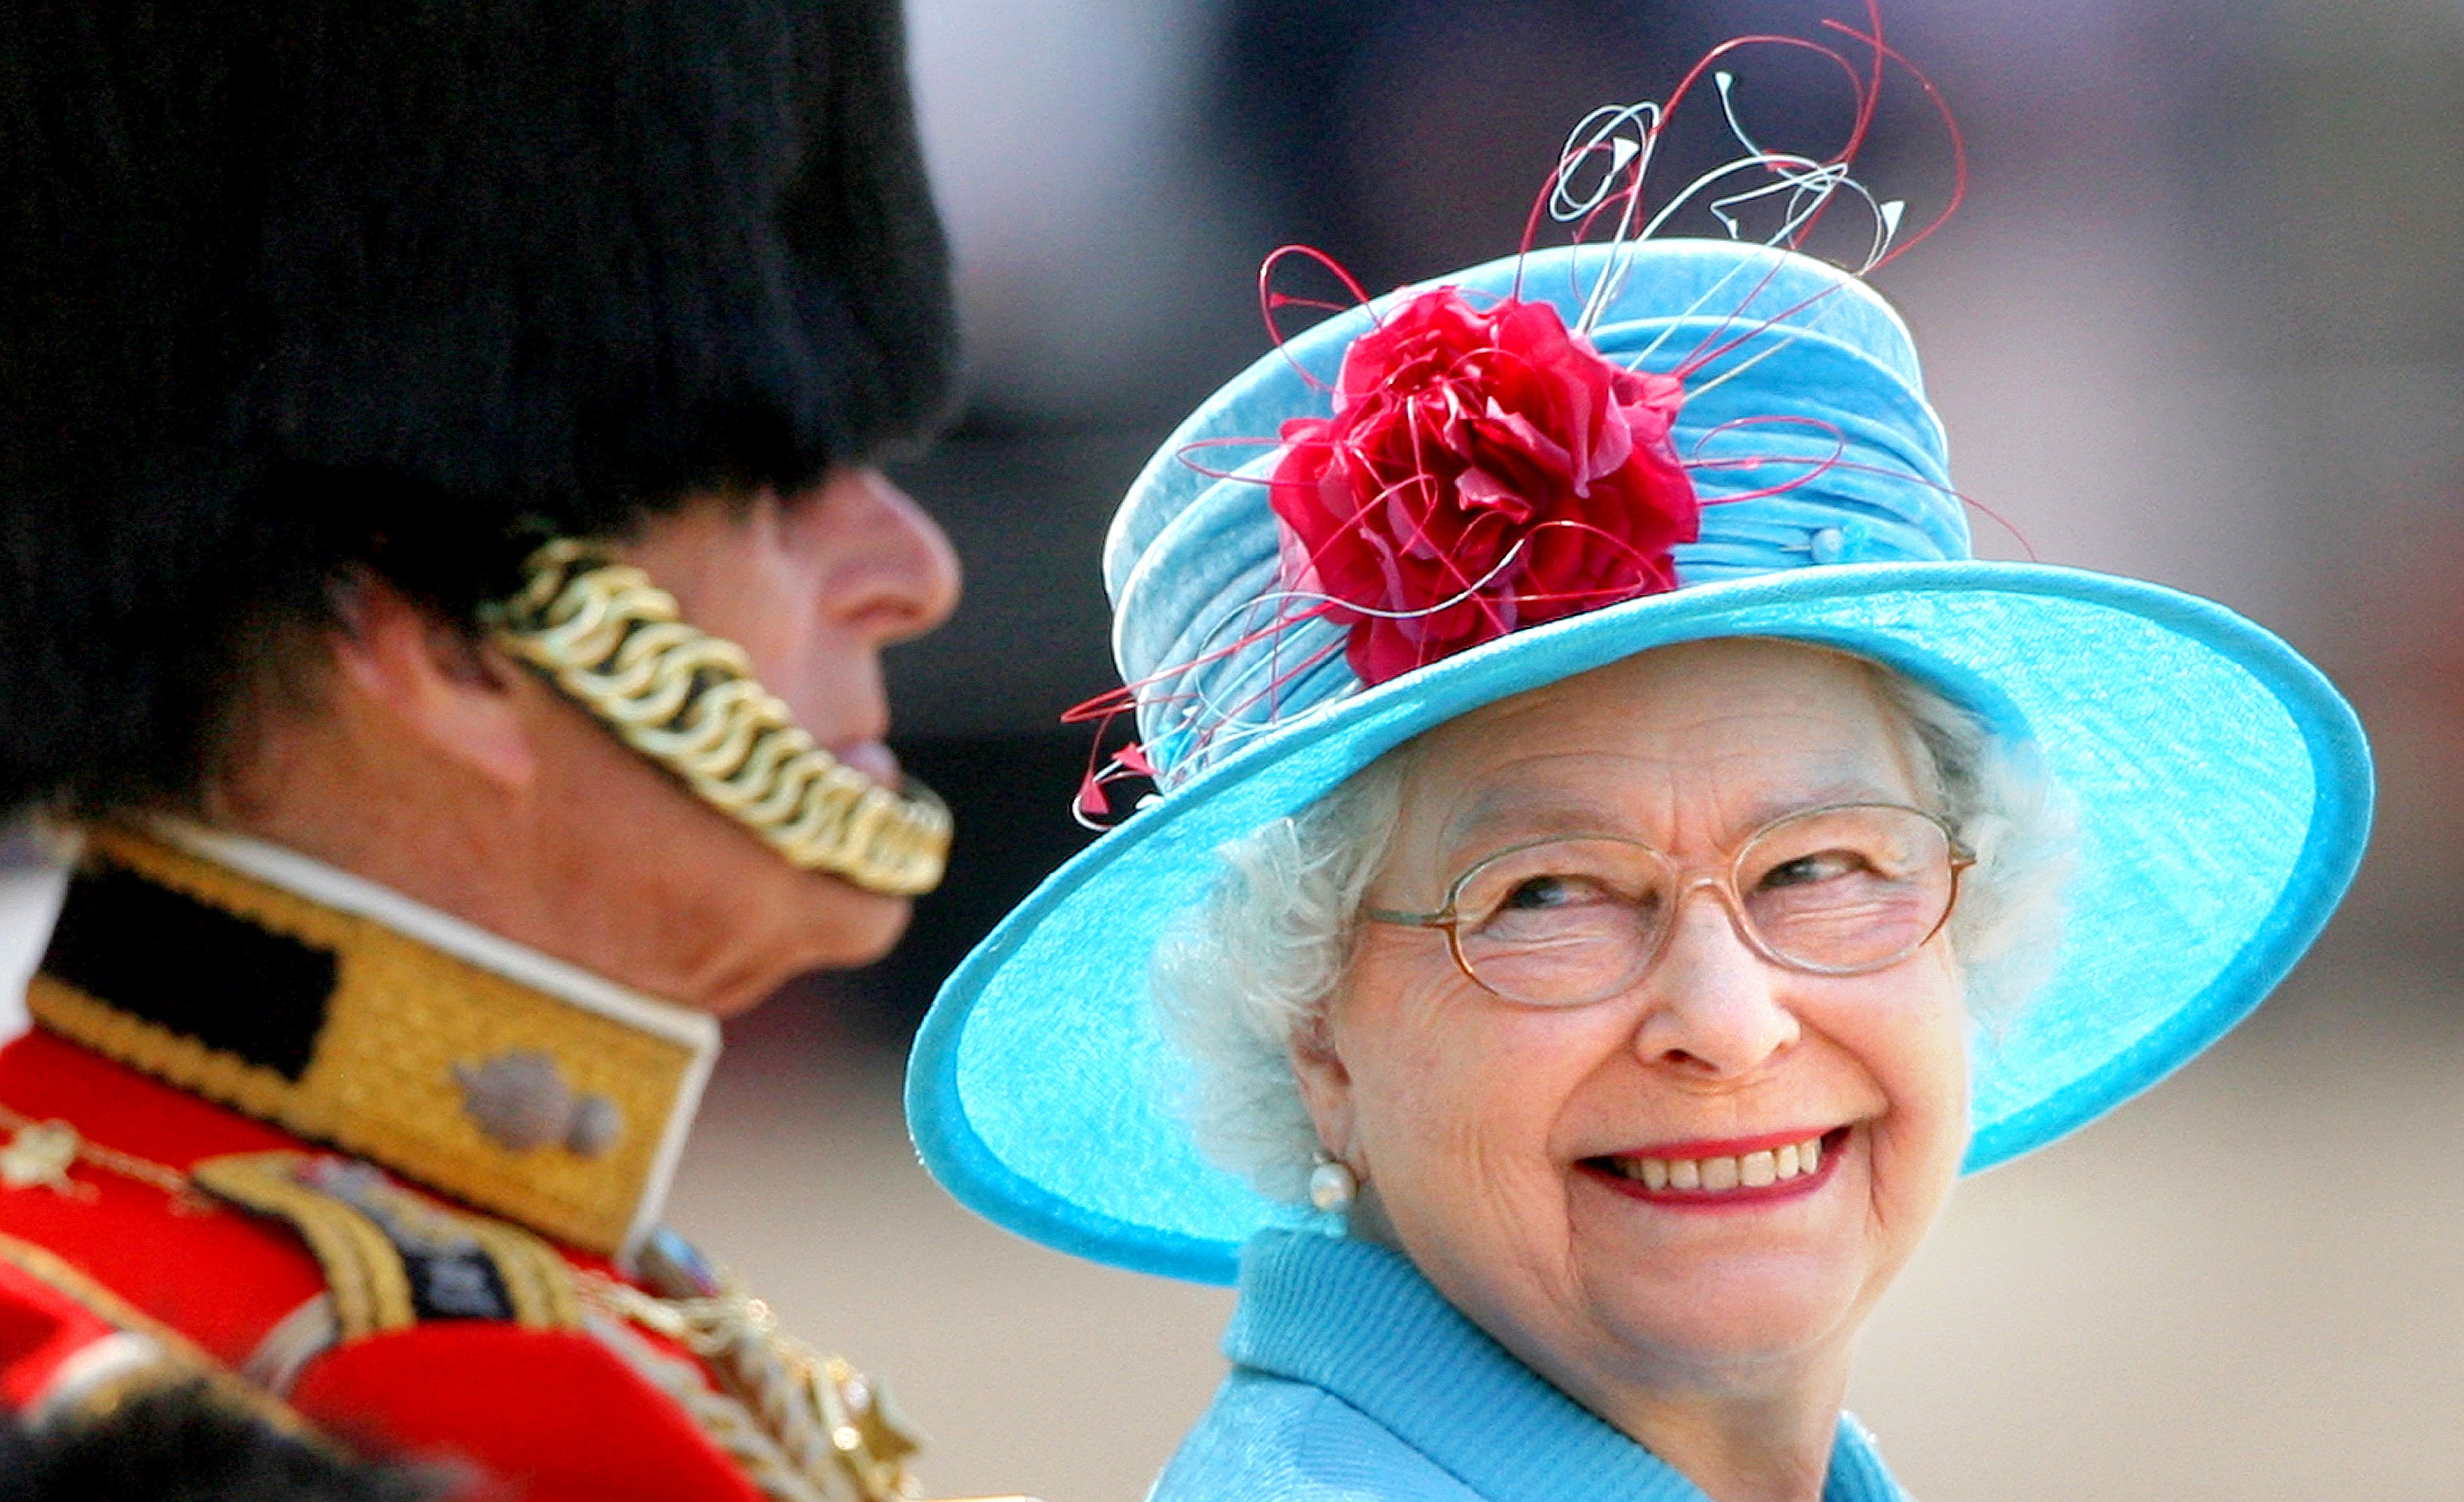 Barbados has removed the Queen as head of state